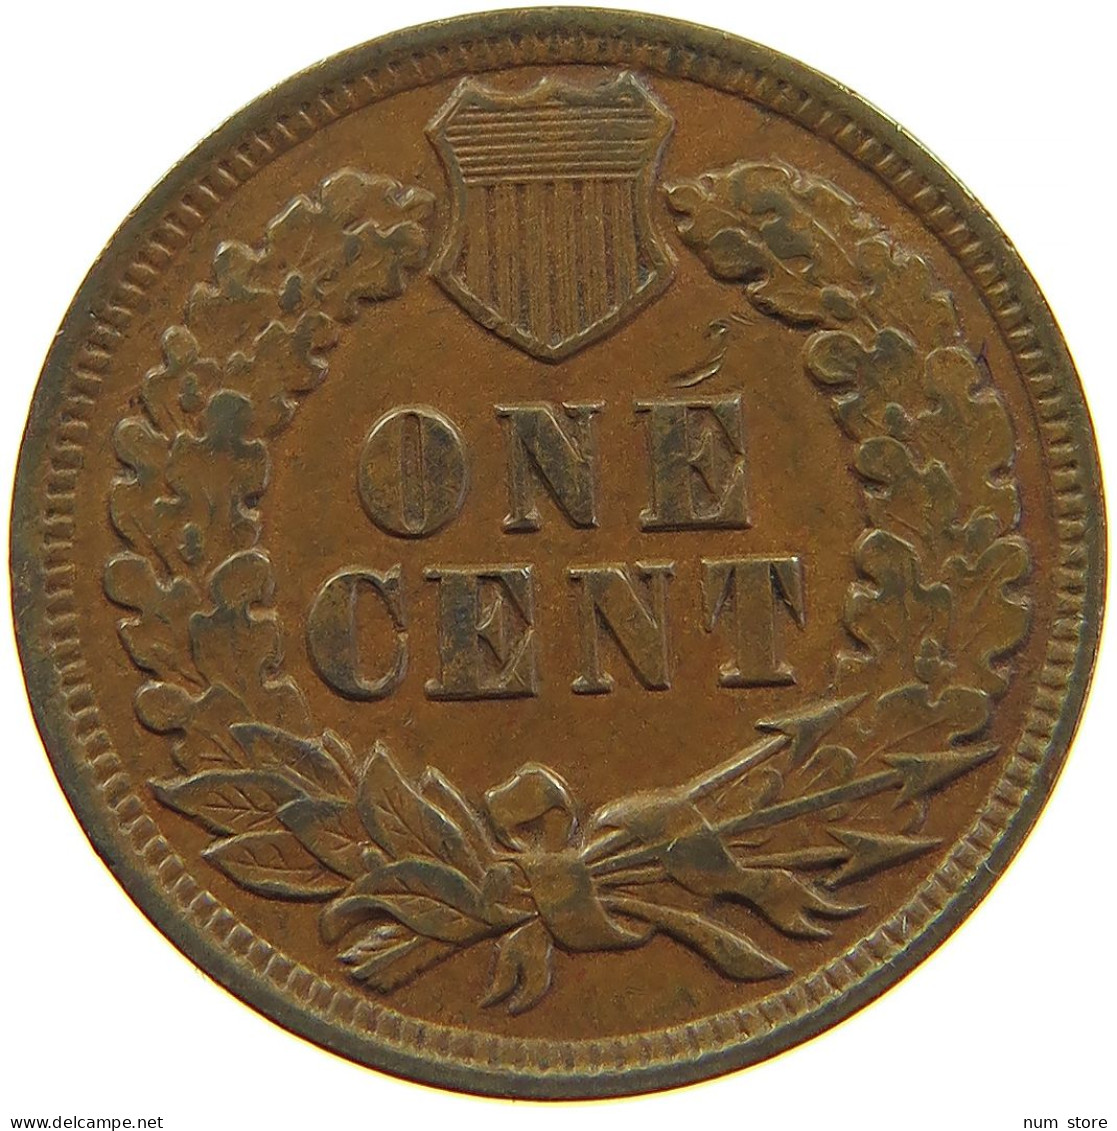 UNITED STATES OF AMERICA CENT 1902 INDIAN HEAD #s091 0397 - 1859-1909: Indian Head